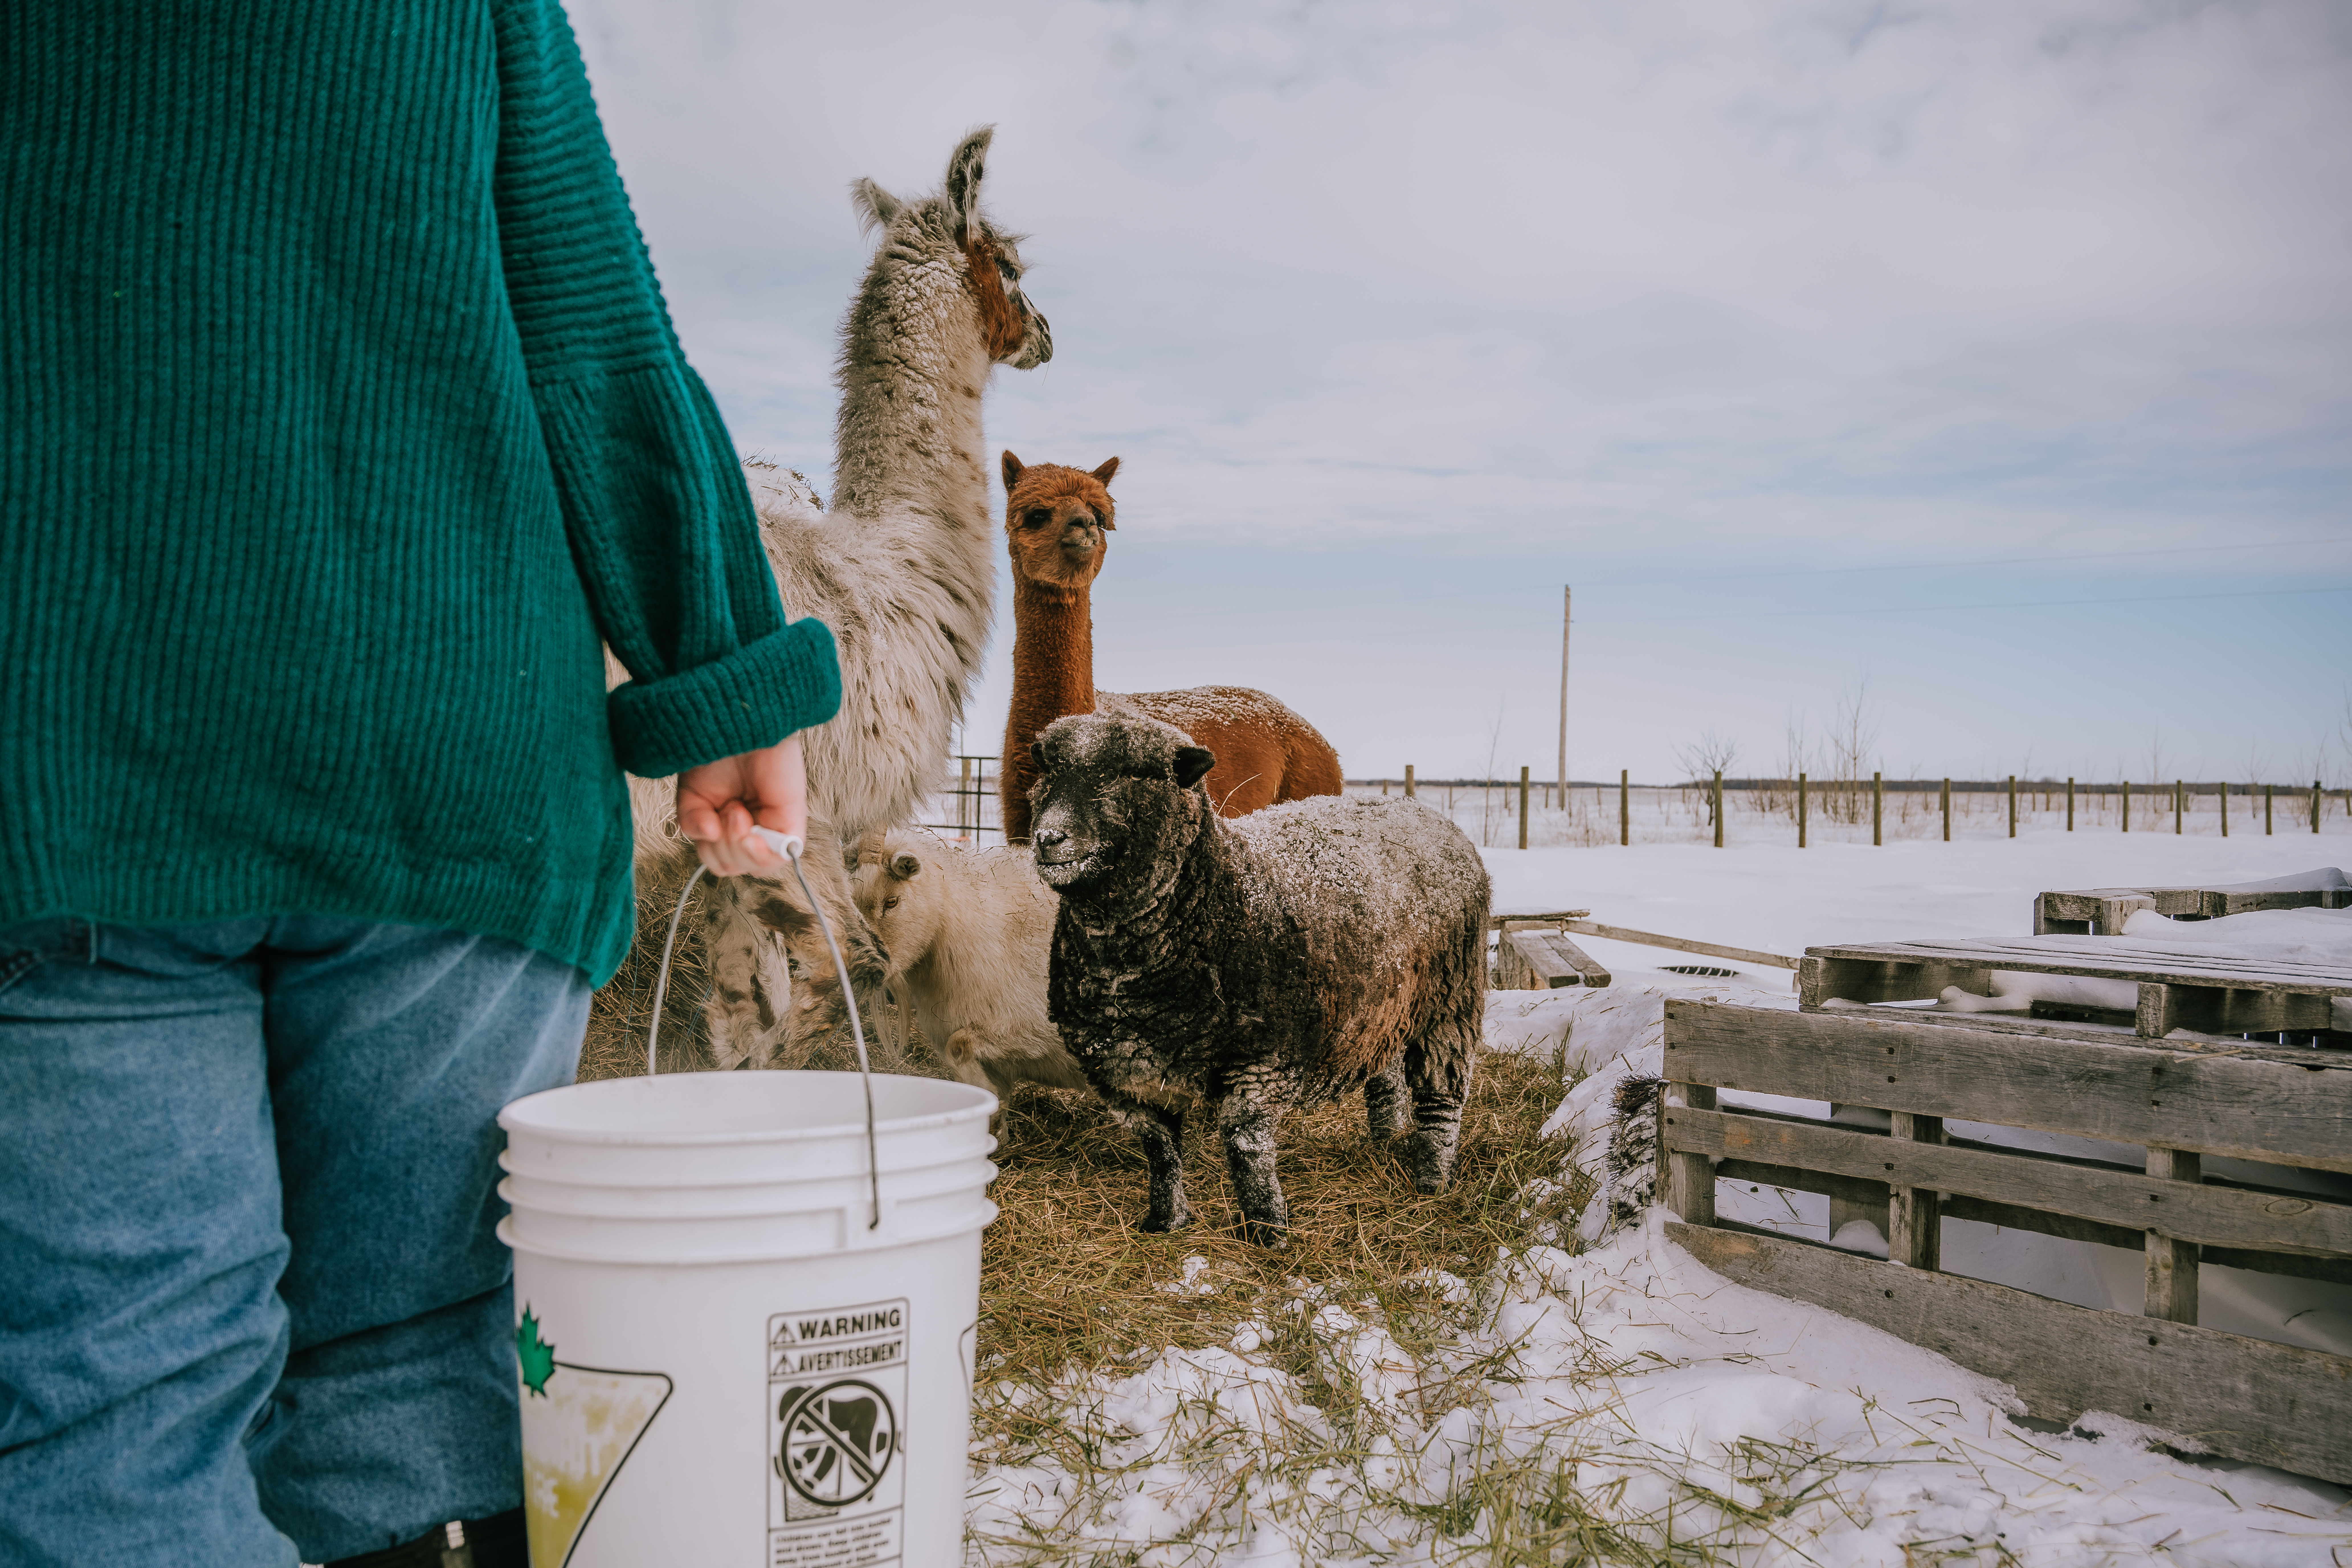 A person in a teal sweater holding a bucket stands near various farm animals, including a llama and sheep, in a snowy field.